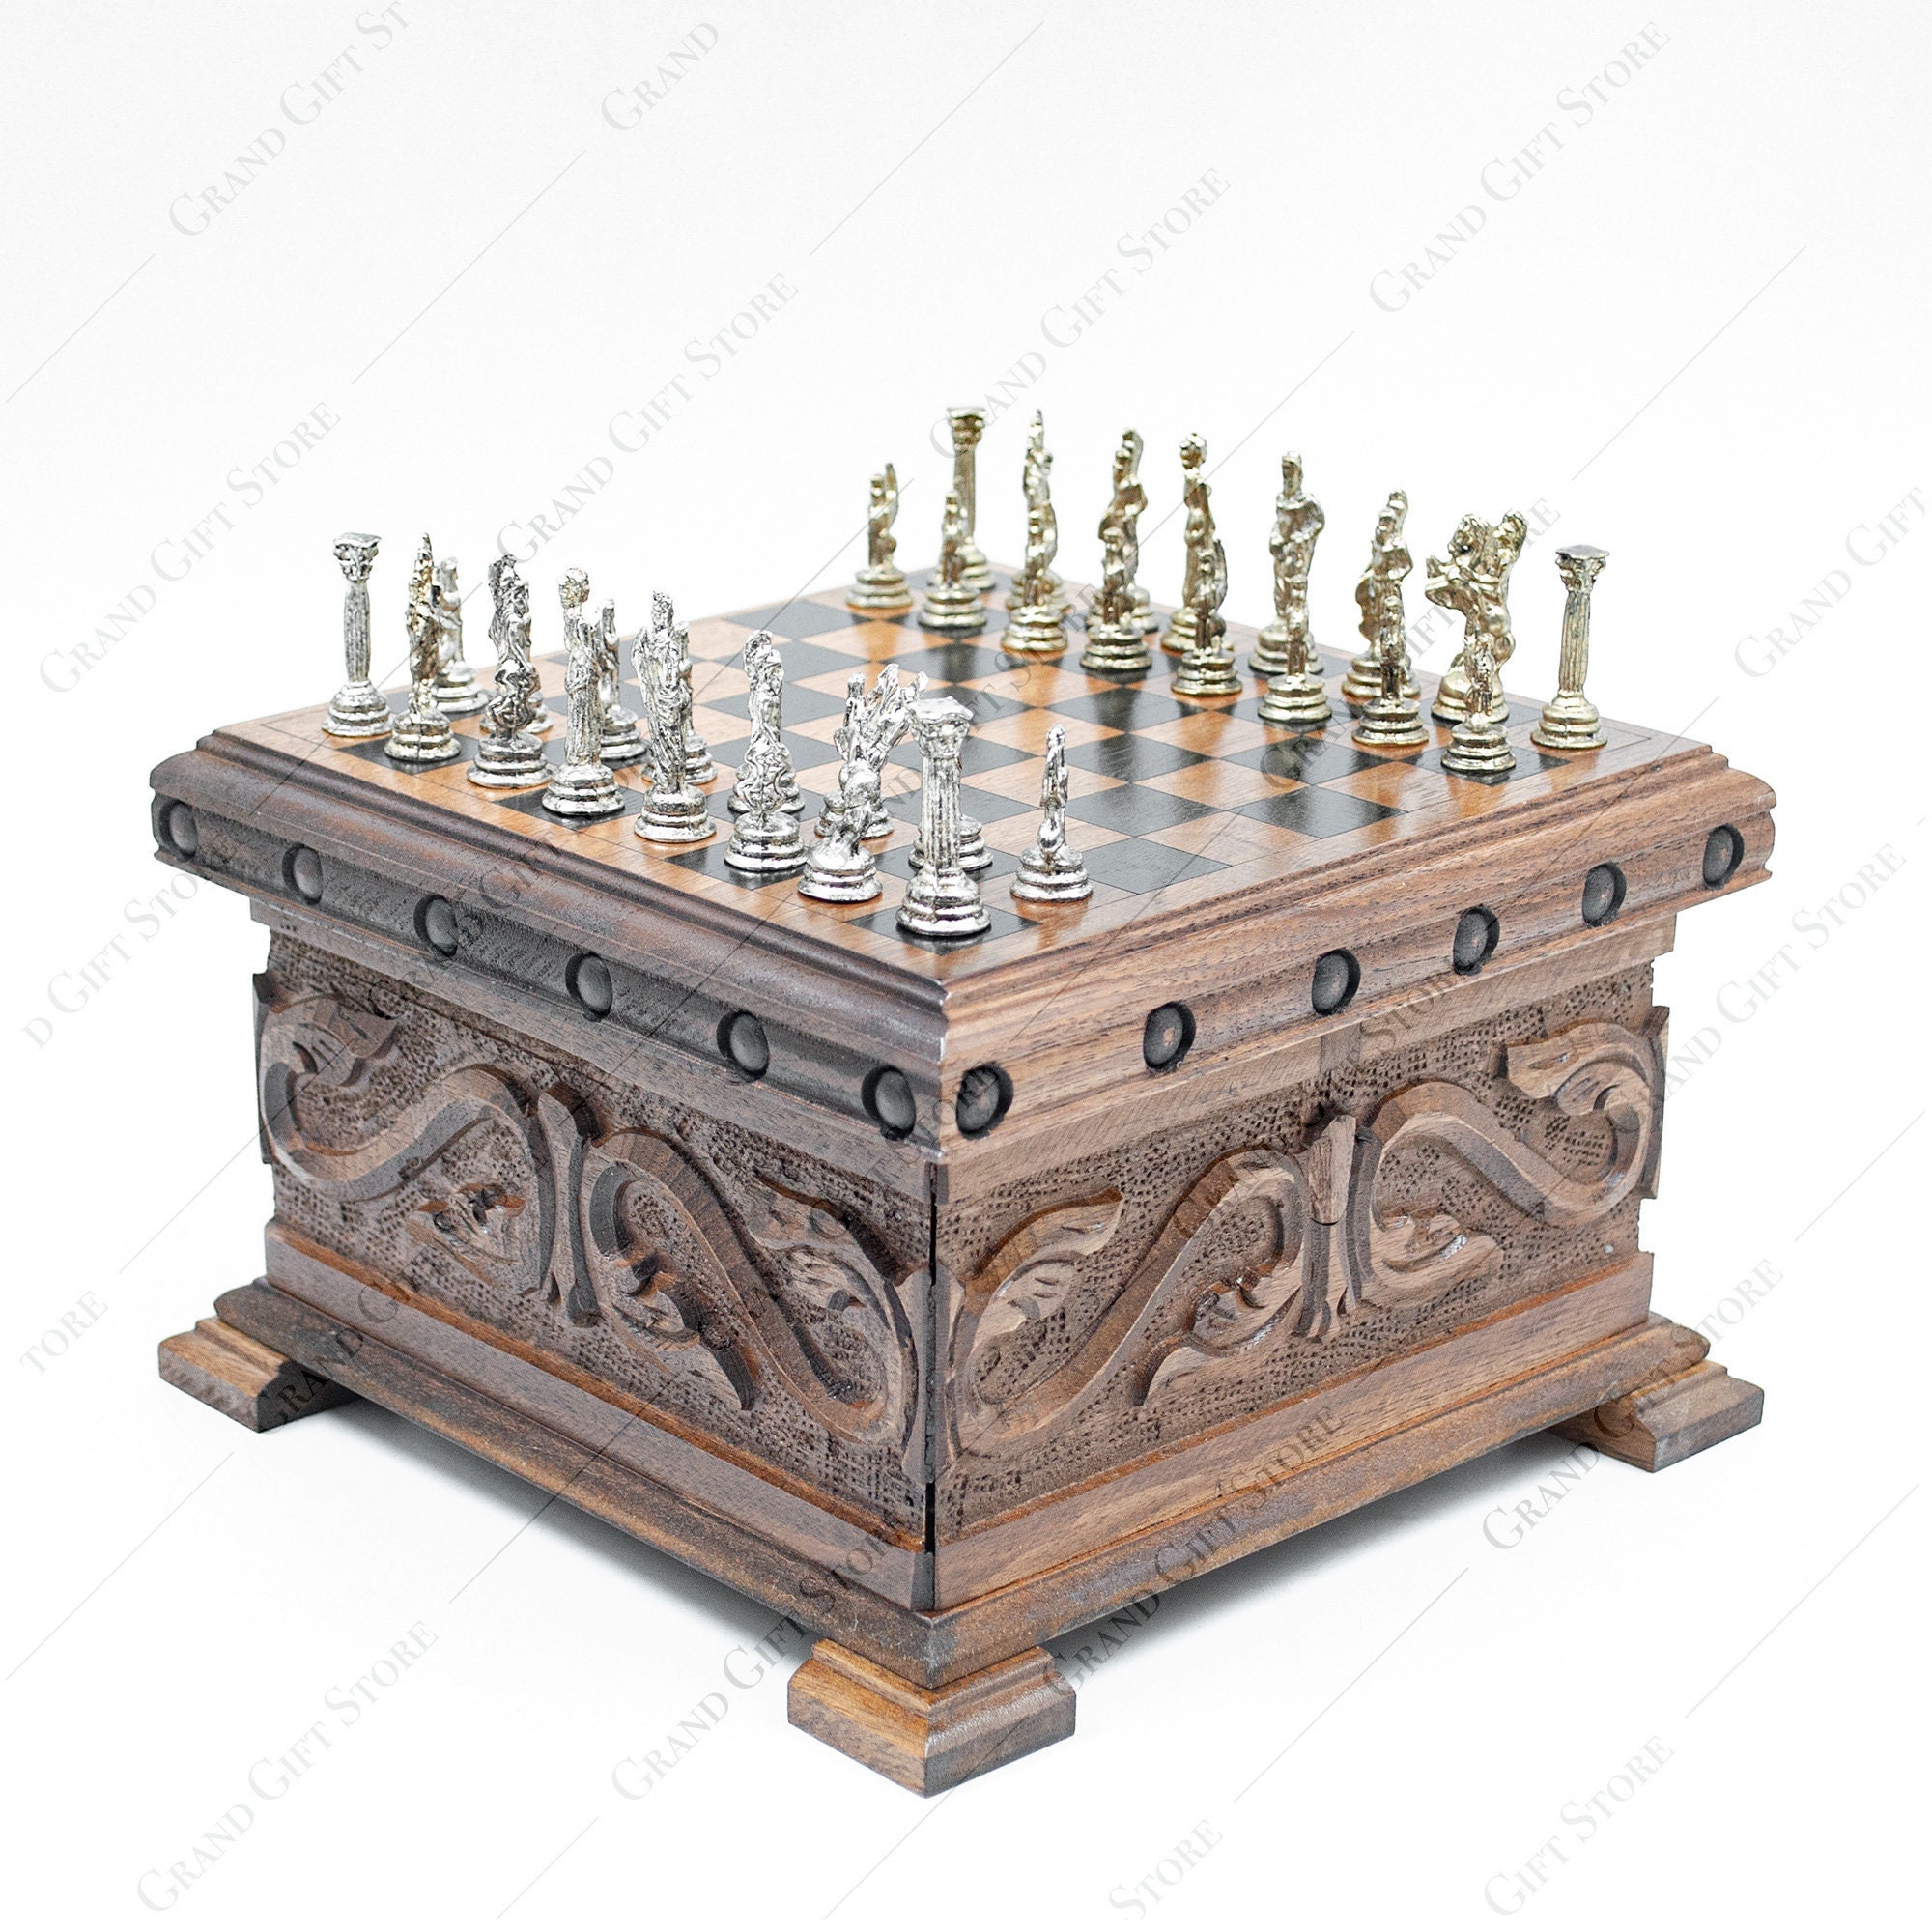 Cool chess sets